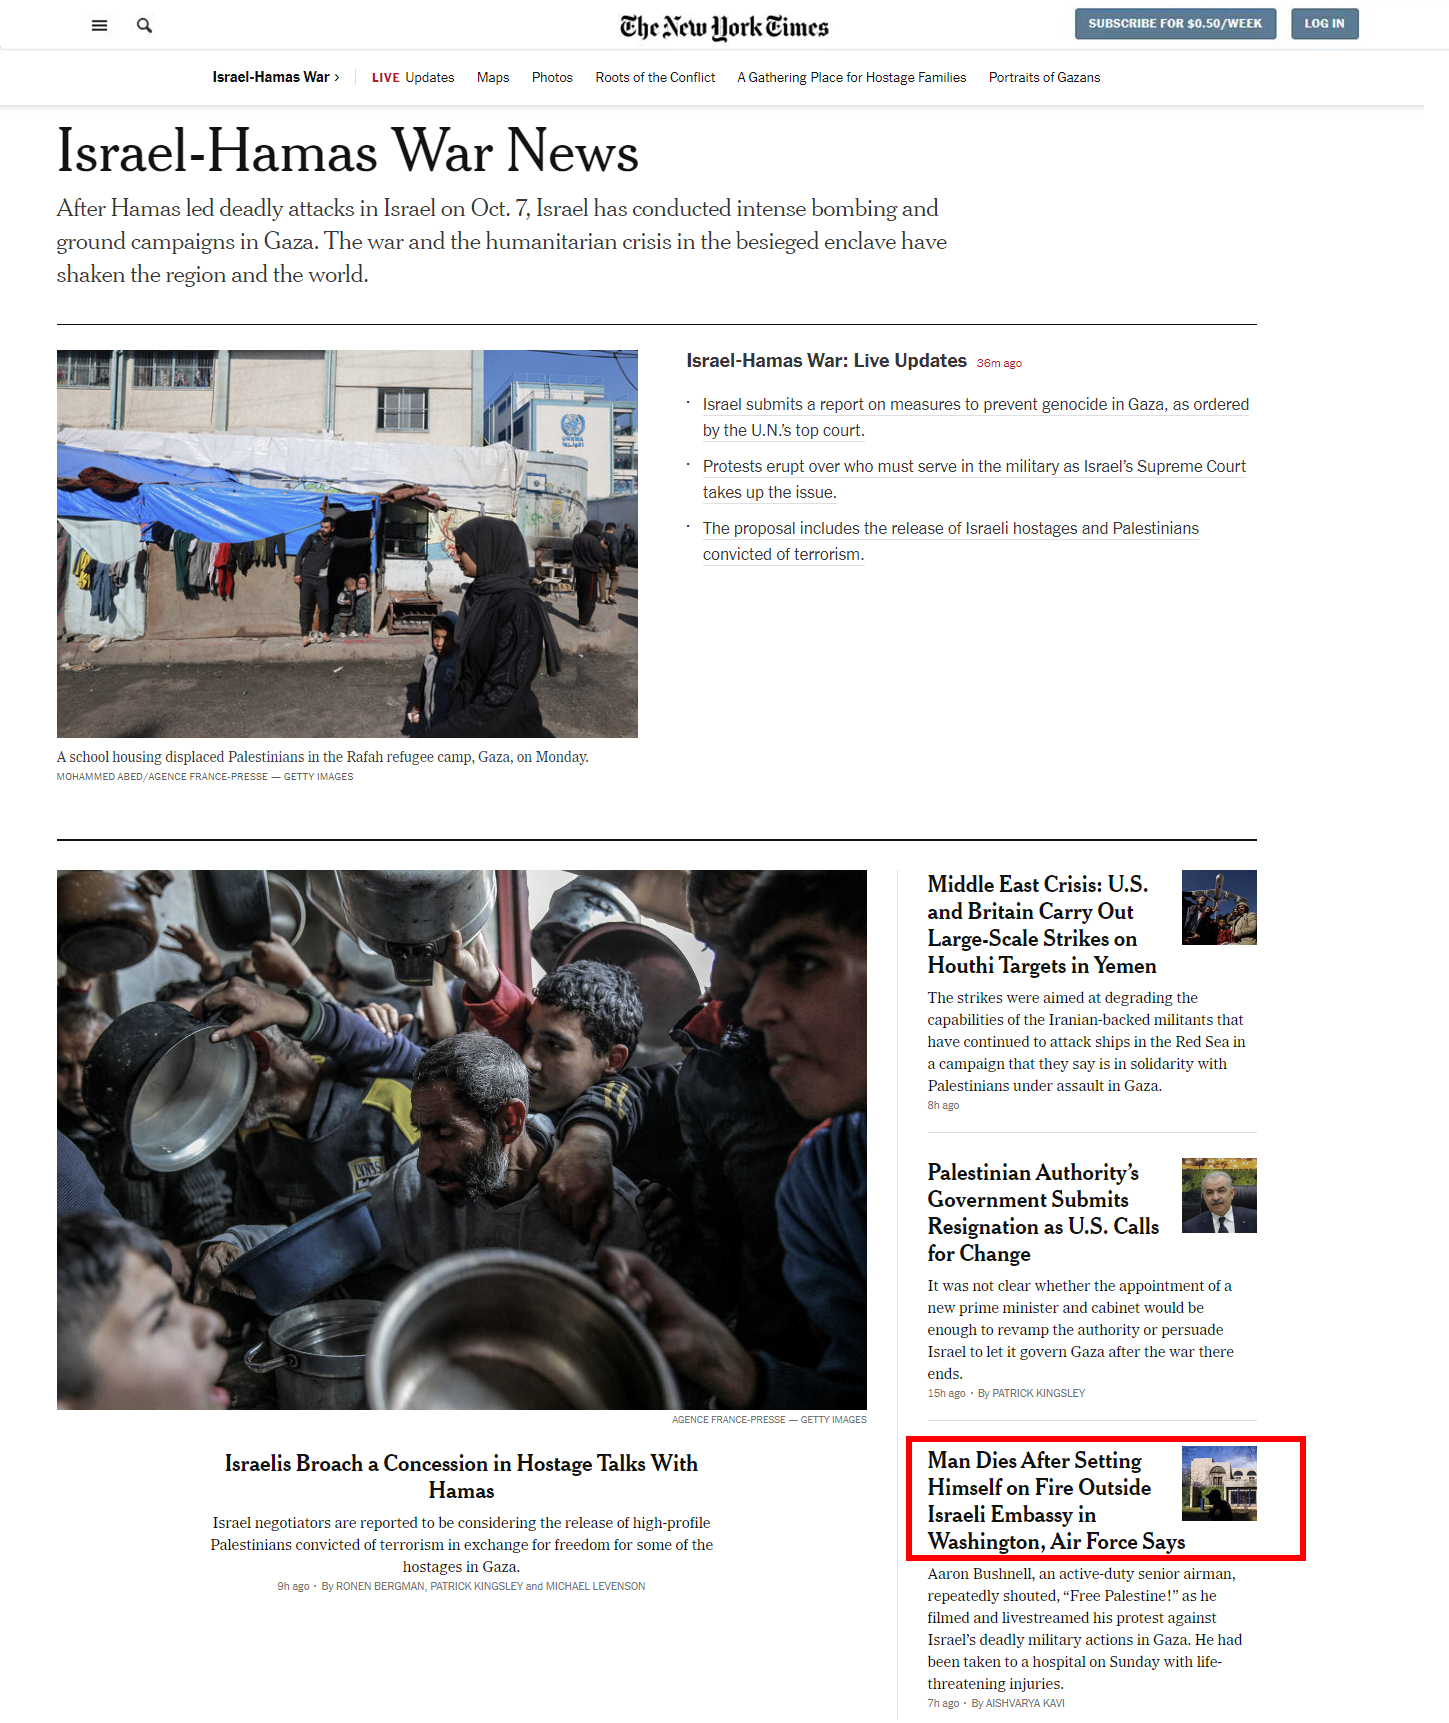 A screenshot of The New York Times' special webpage on the Israel-Hamas war.